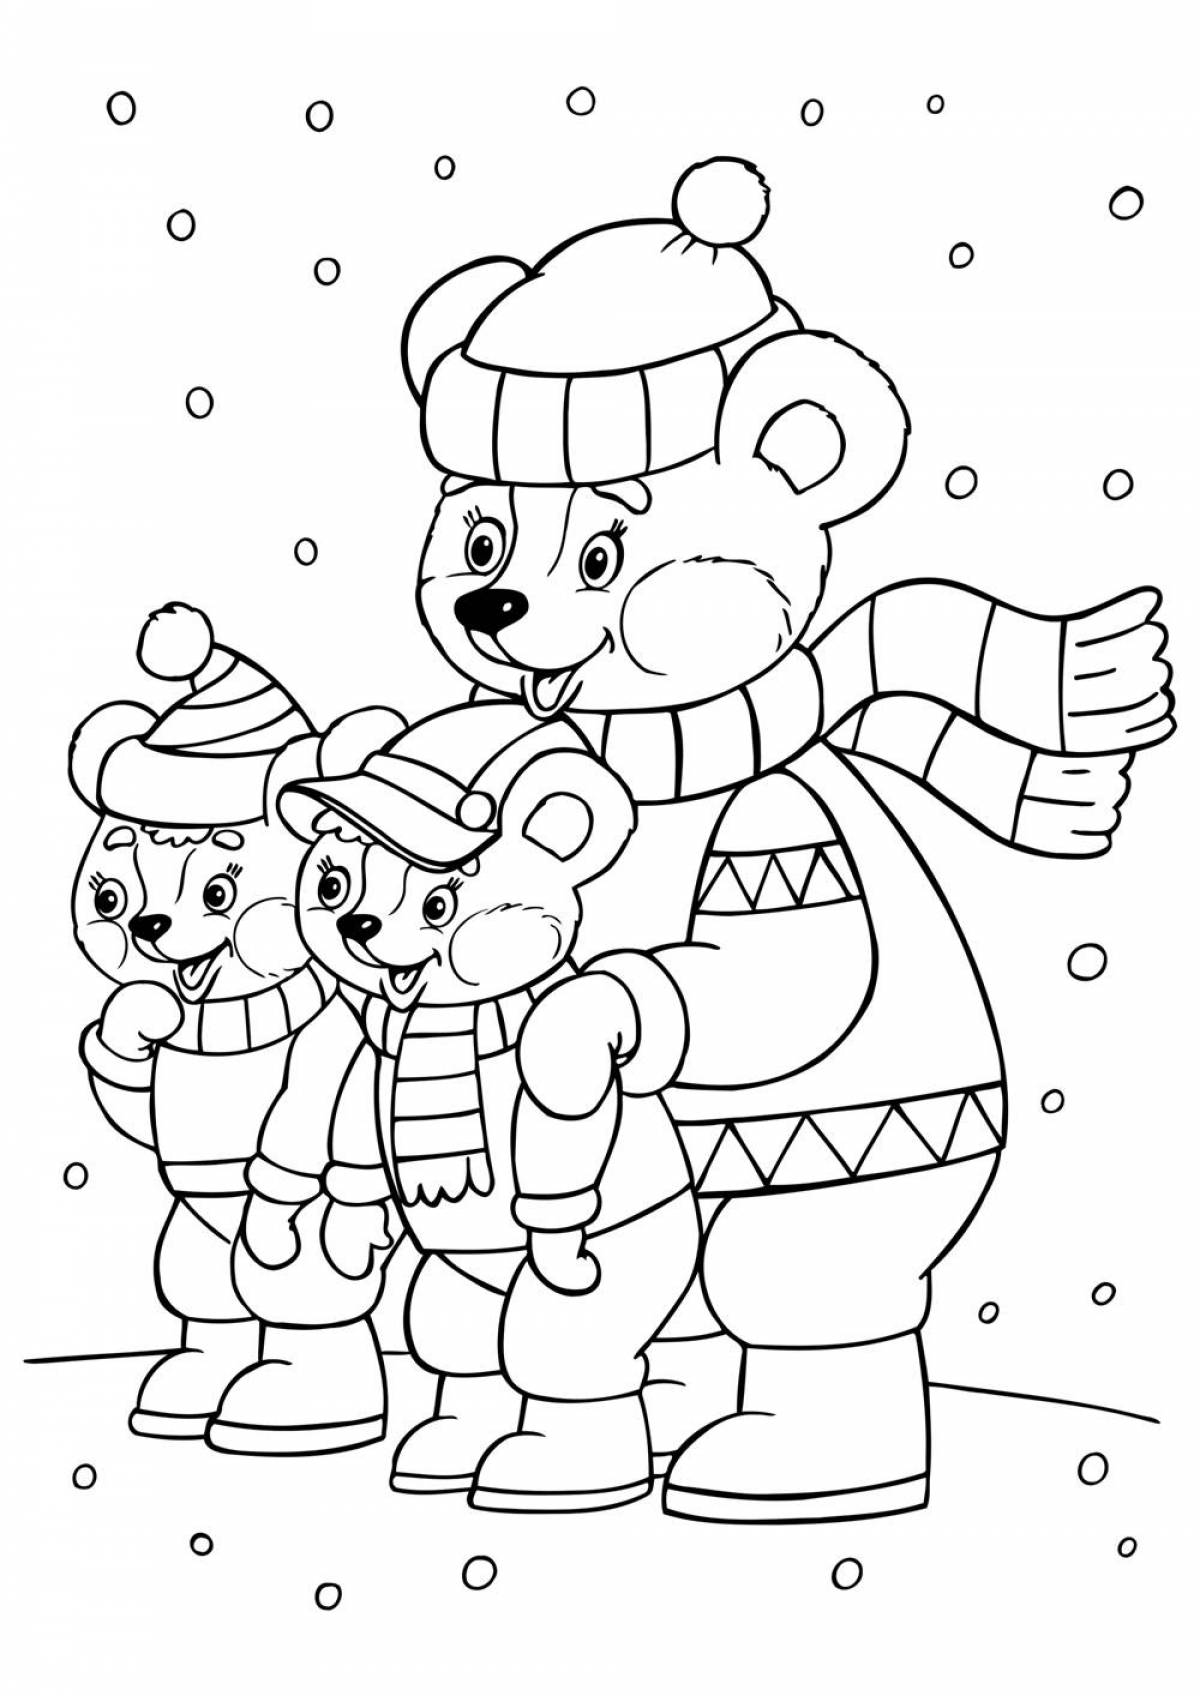 Playful winter coloring book for children 5-6 years old